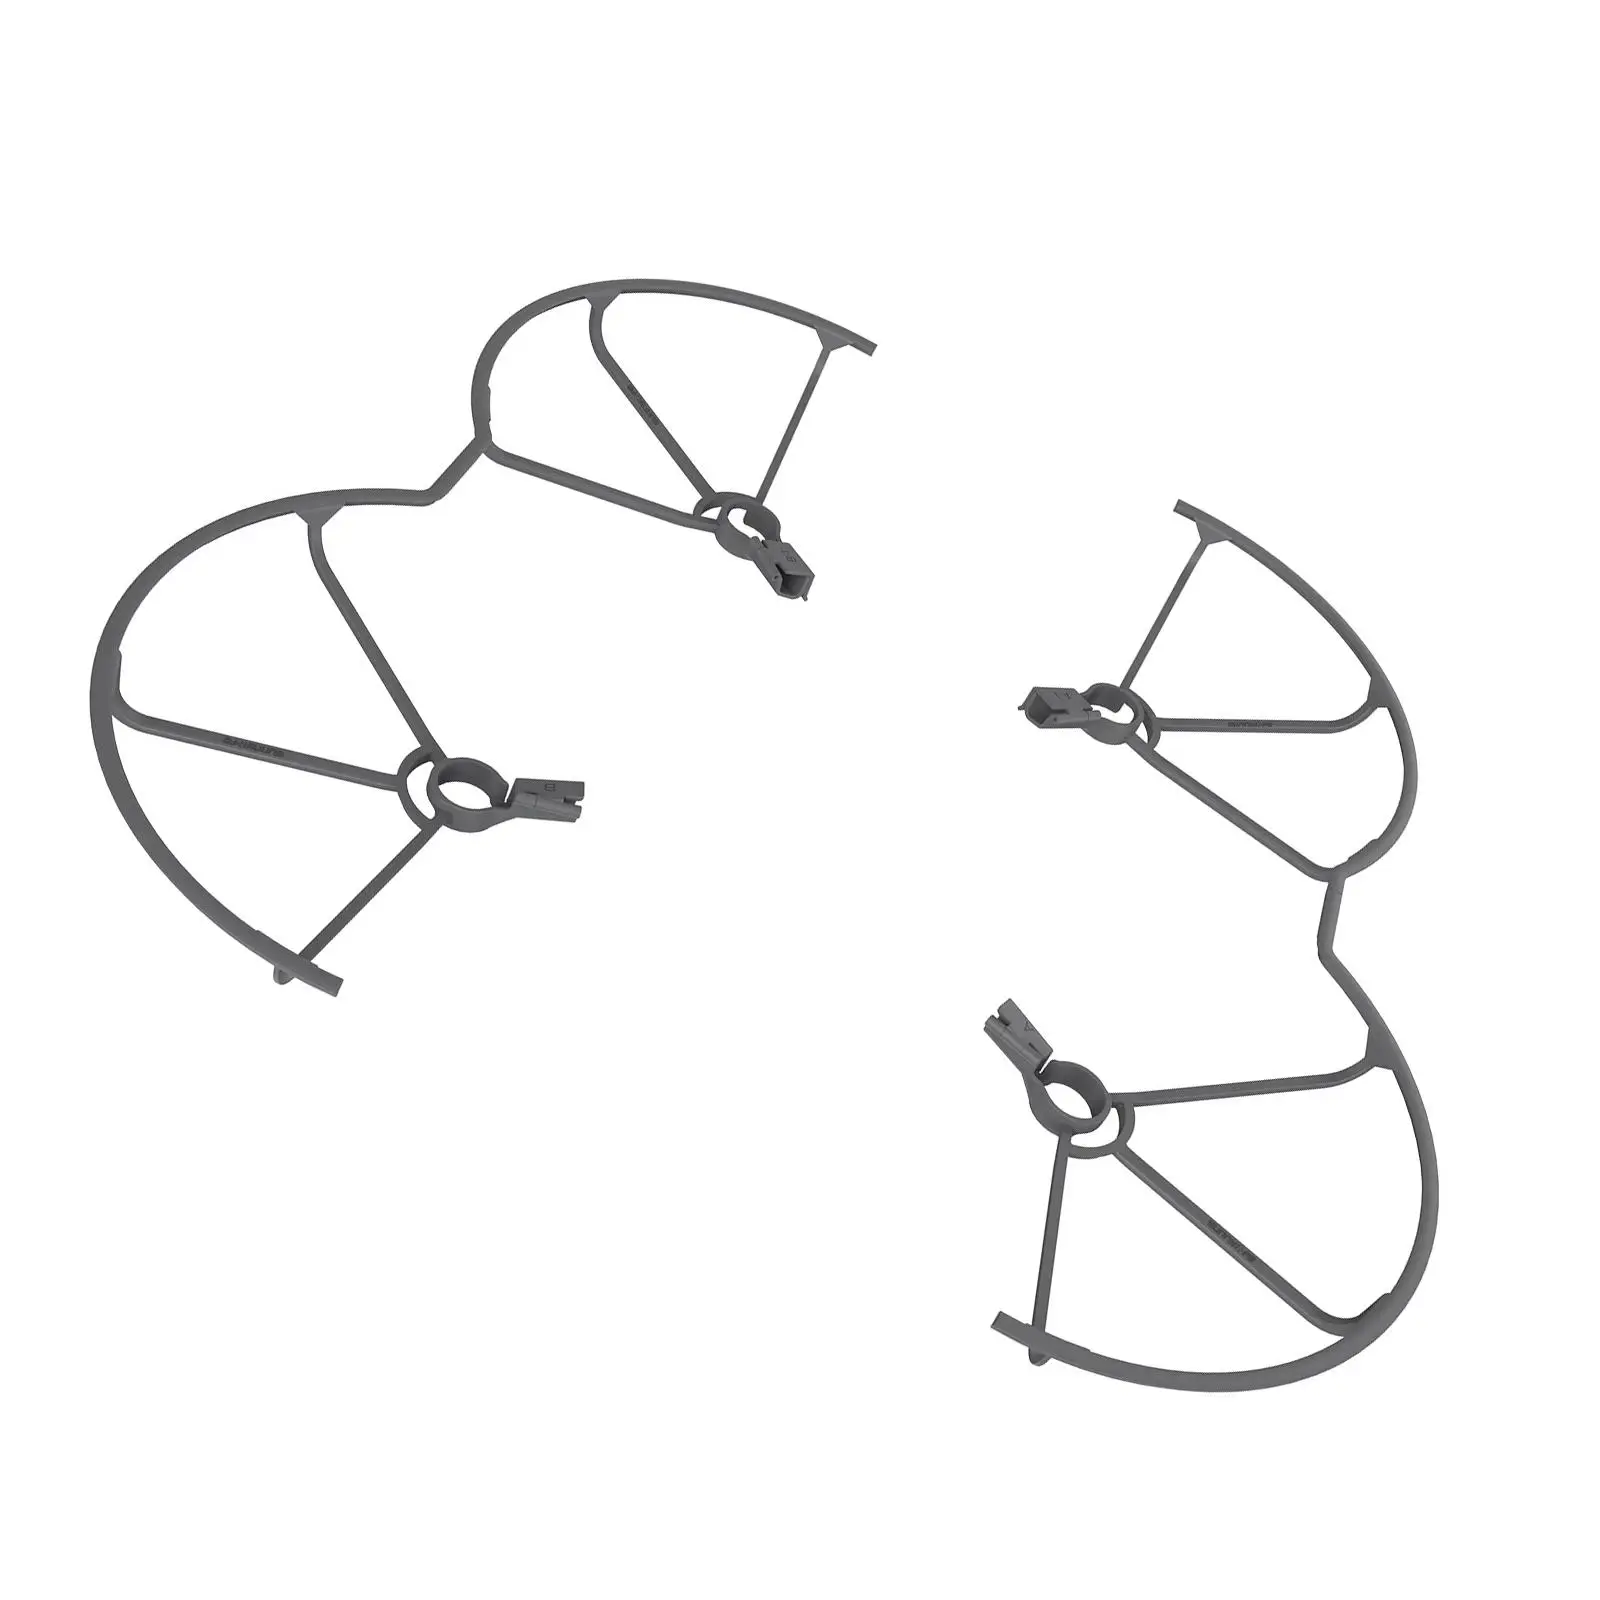 2 Pieces Propeller  Guard Protective Anti-  Accessory Cage Cover Anti-Collision   Mount  for 3